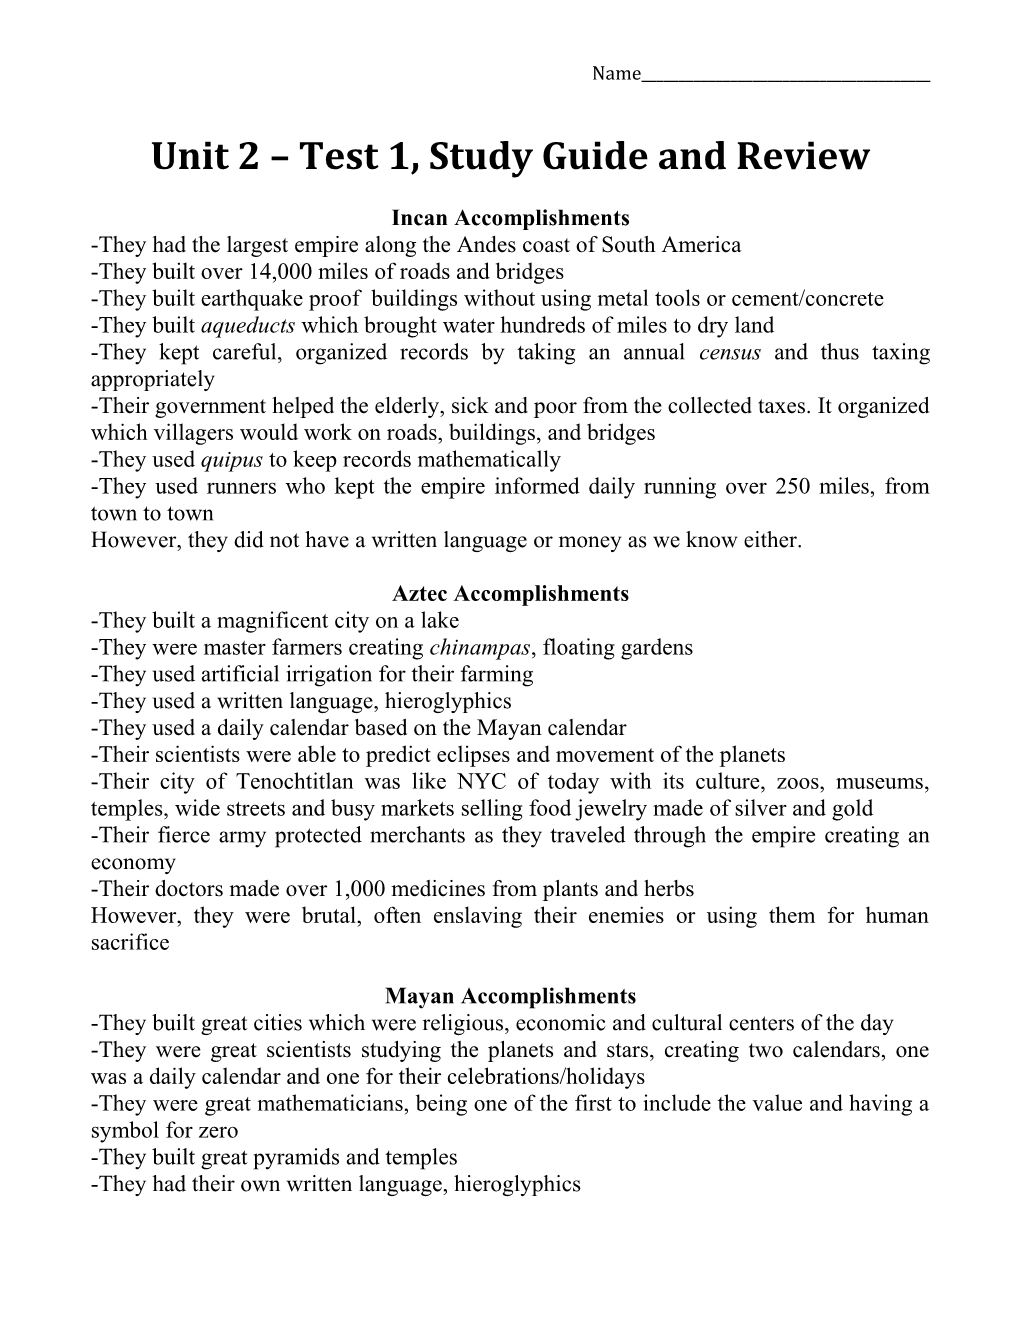 Unit 2 Test 1, Study Guide and Review